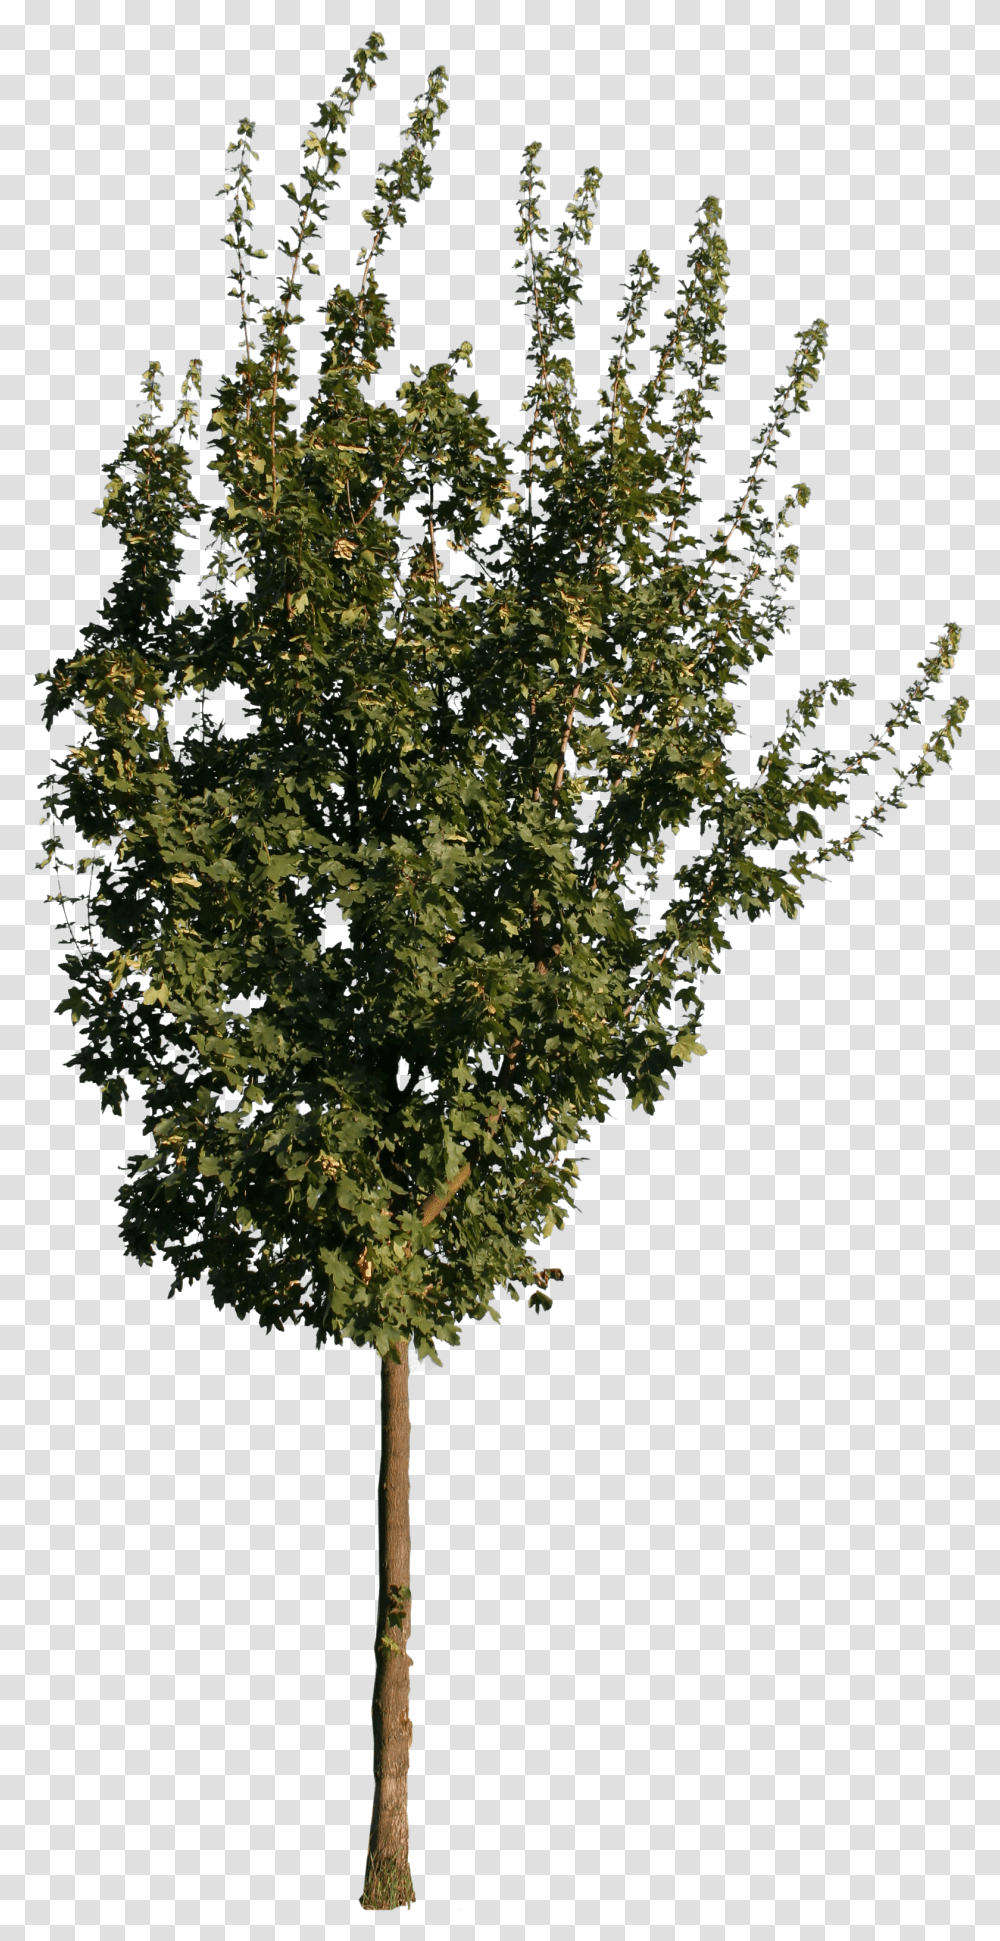 Free Cut Out People Trees And Leaves Tree Cutout Transparent Png